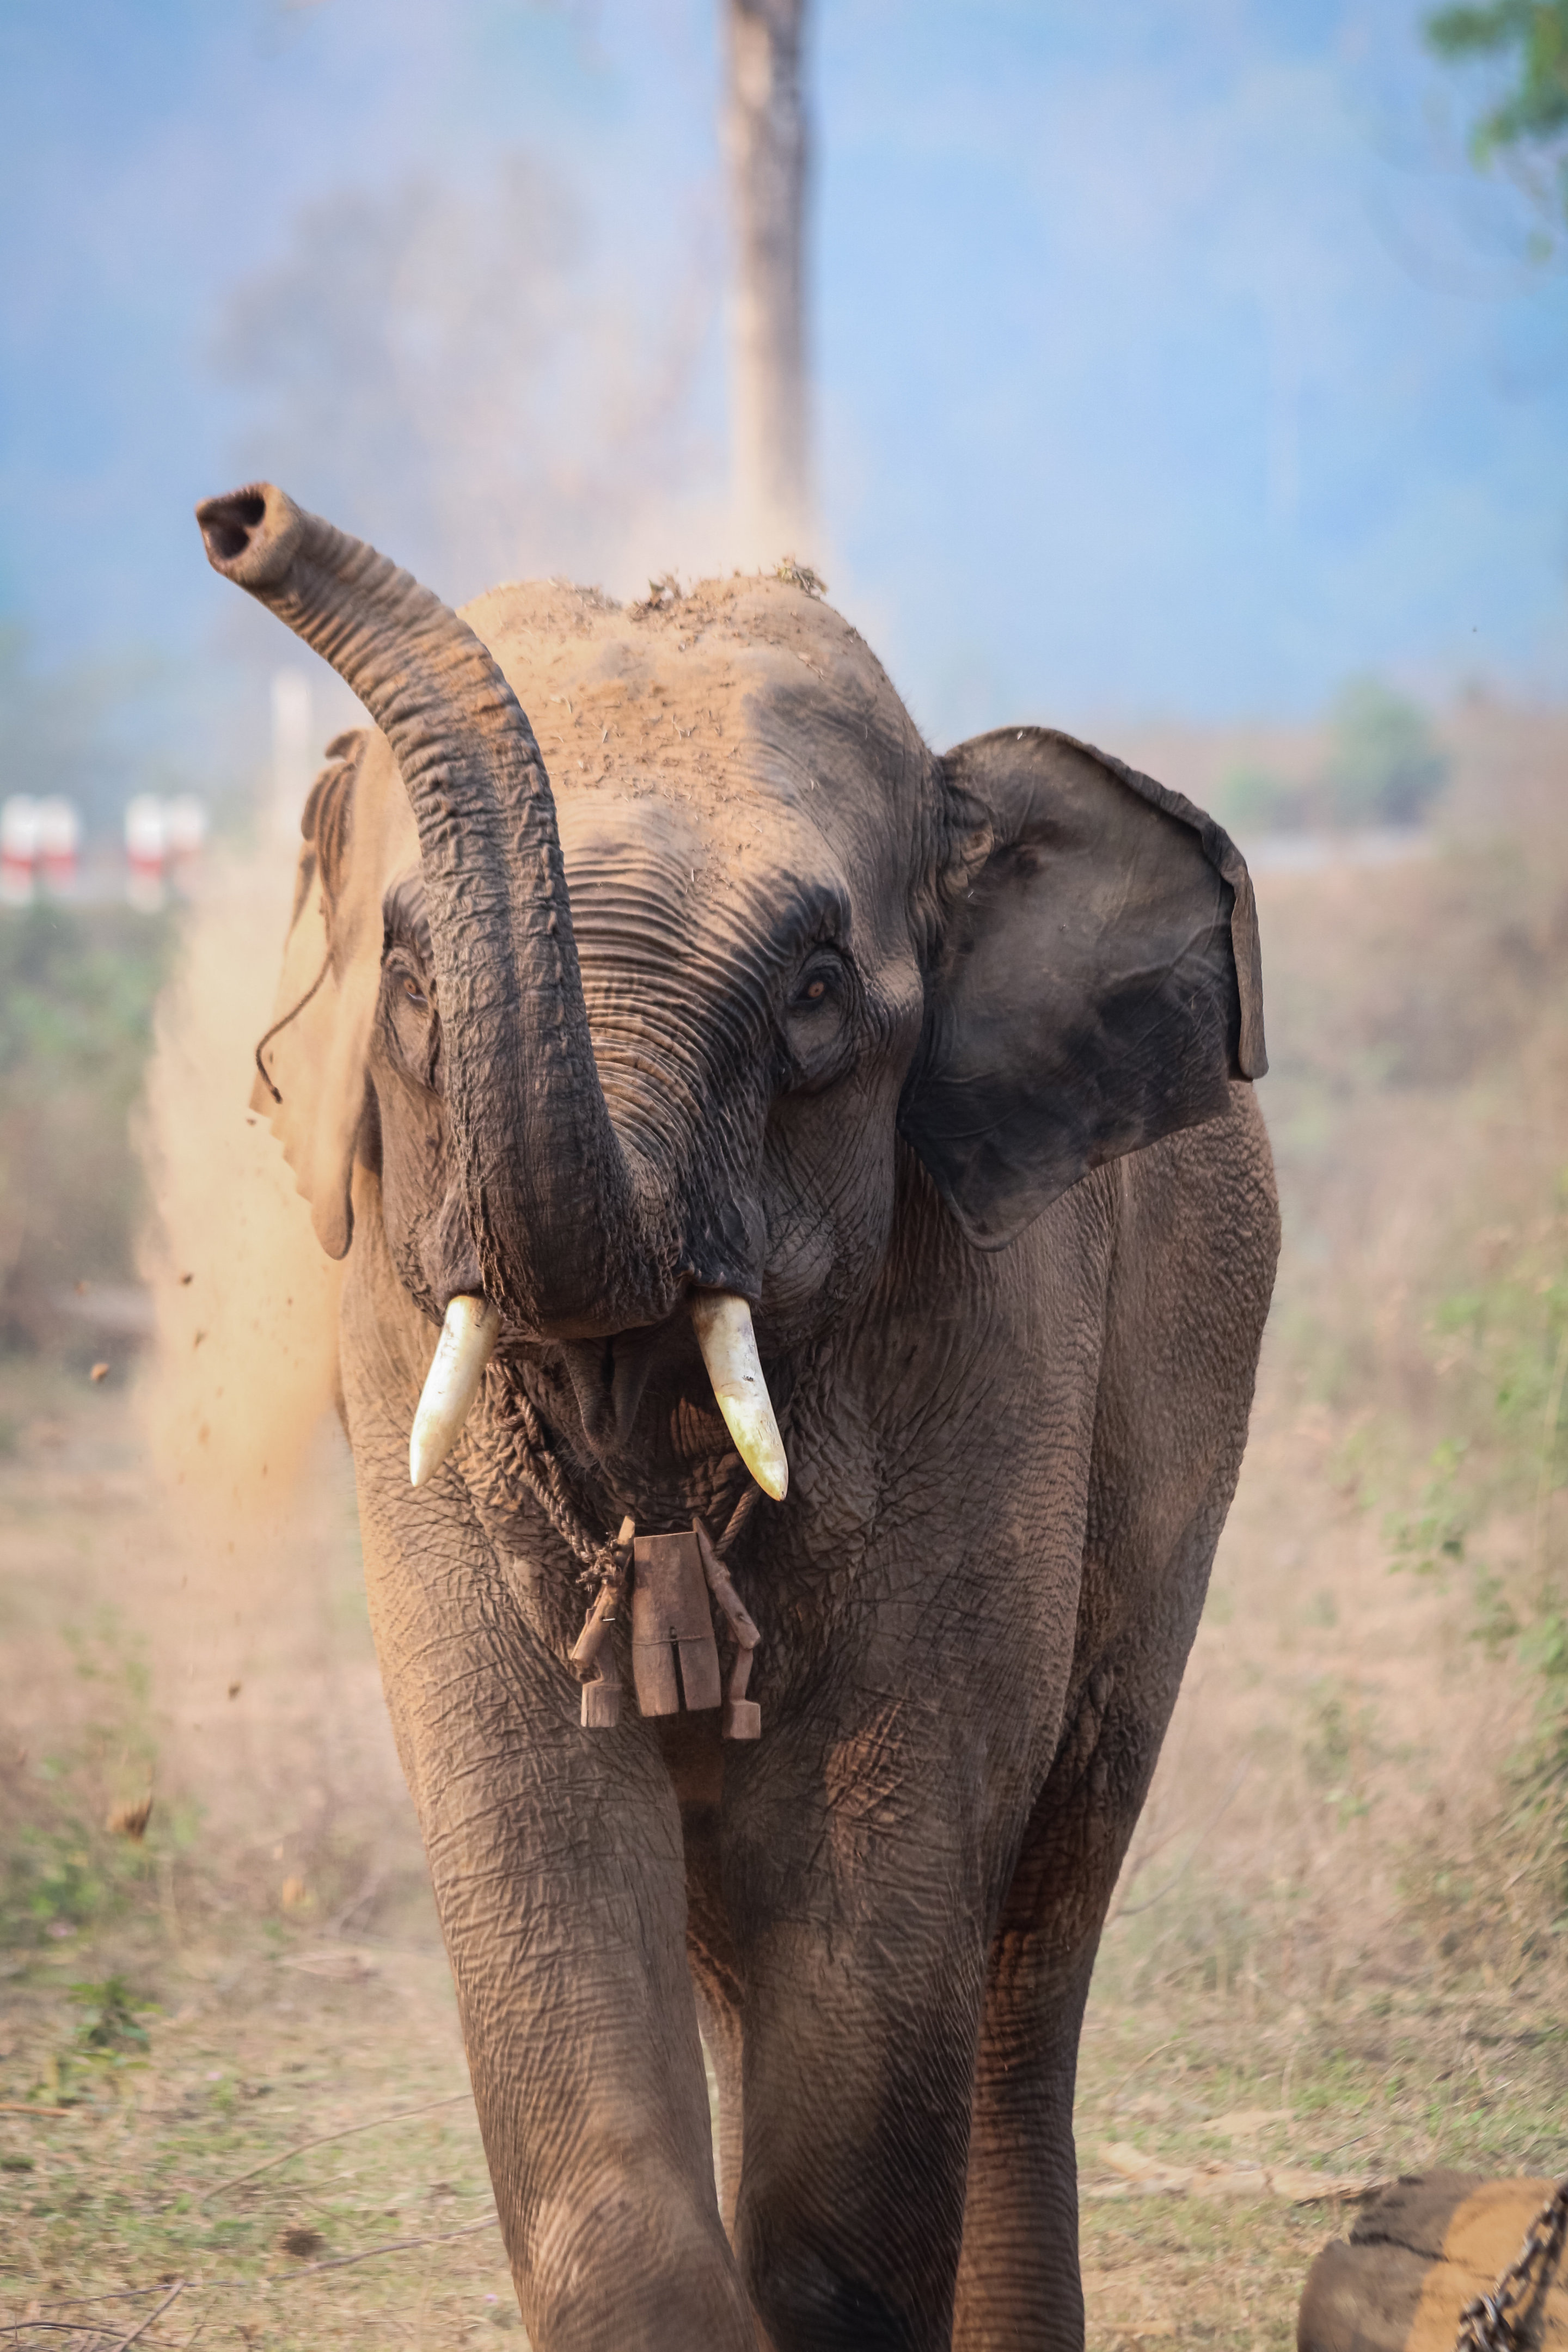 Asian elephants have different personality traits just like humans